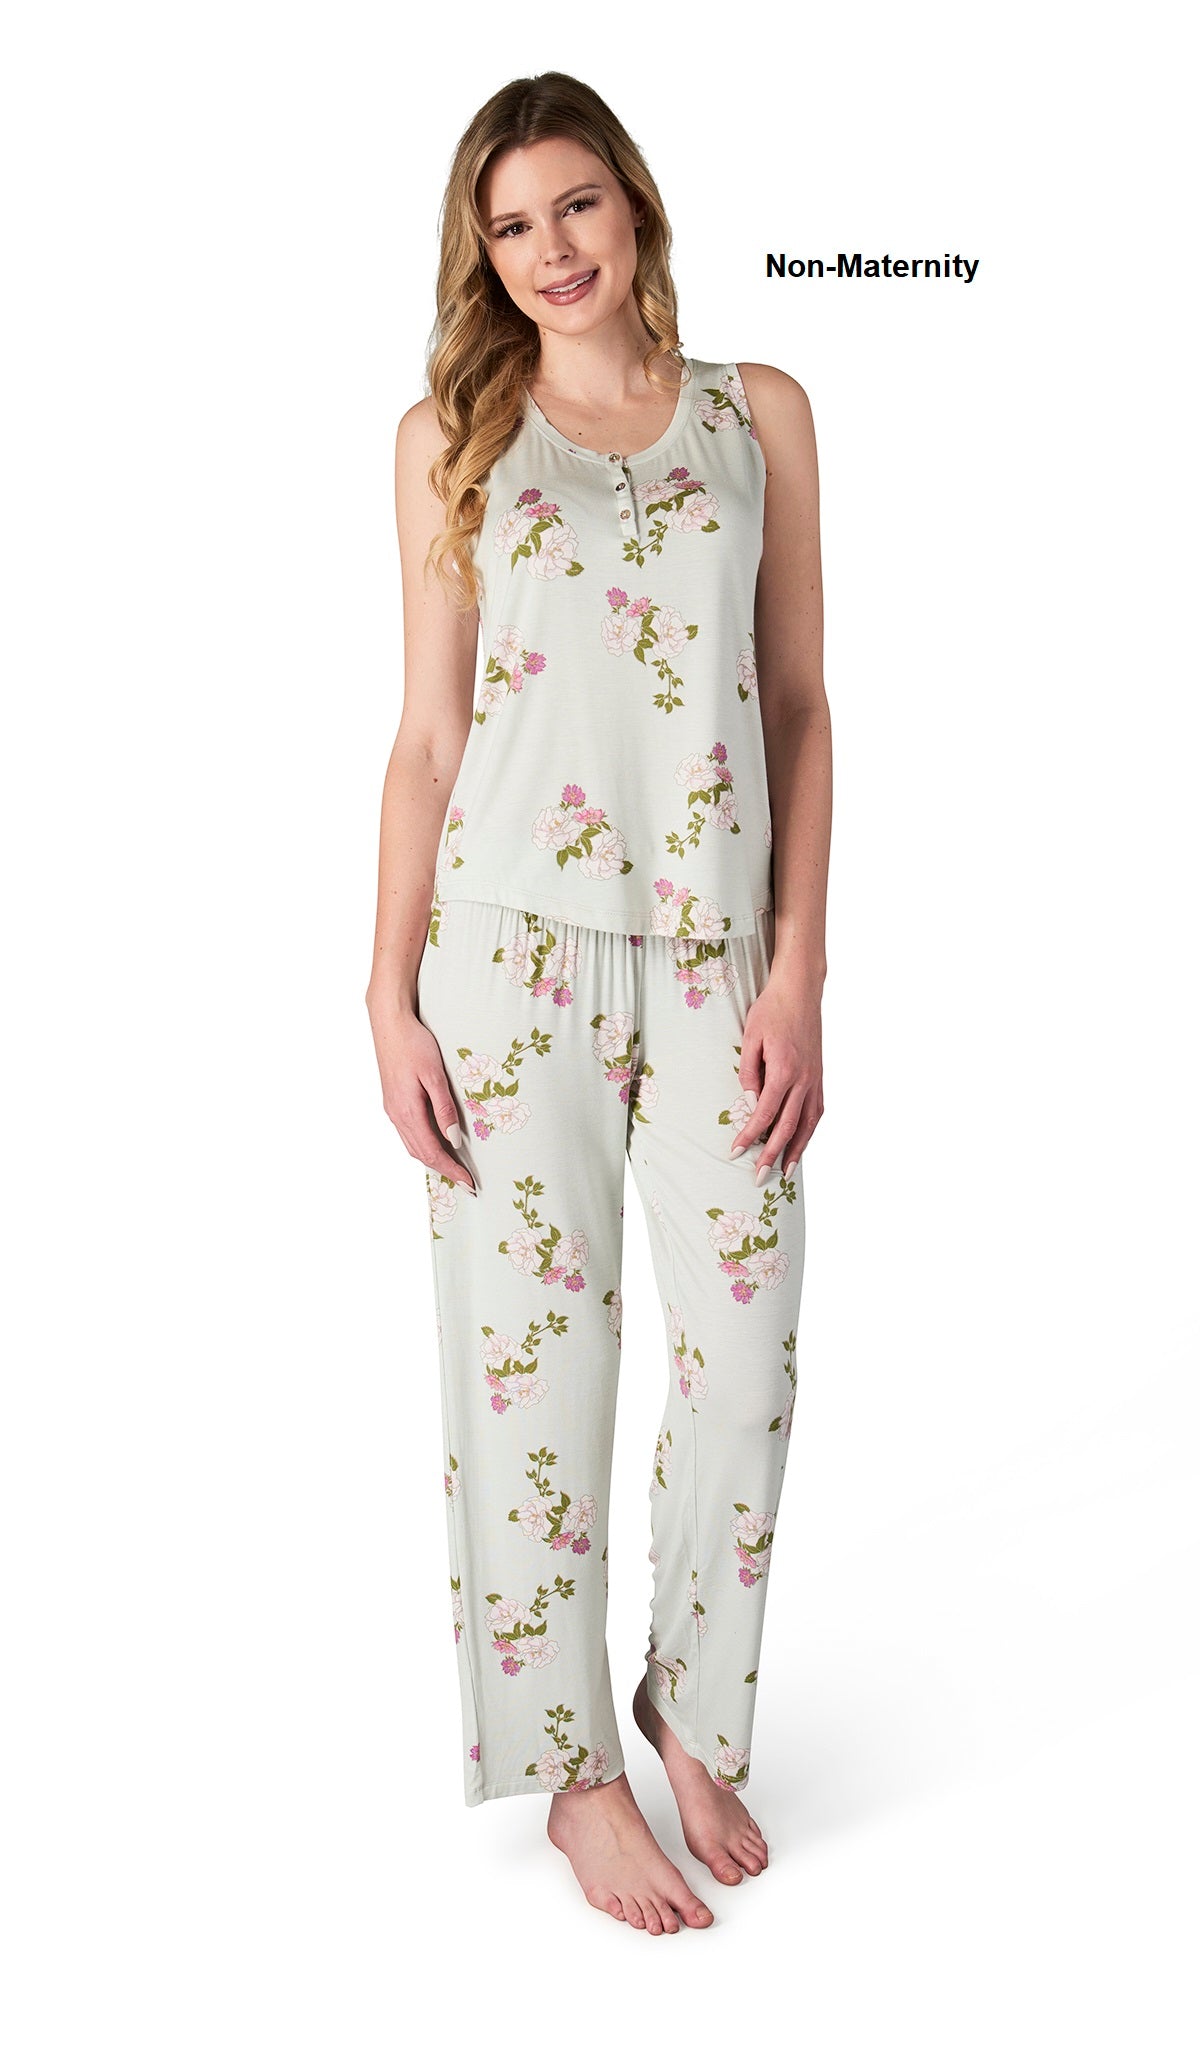 Peony Joy 2-Piece Set. Woman wearing button front placket tank top and pant as non-maternity.